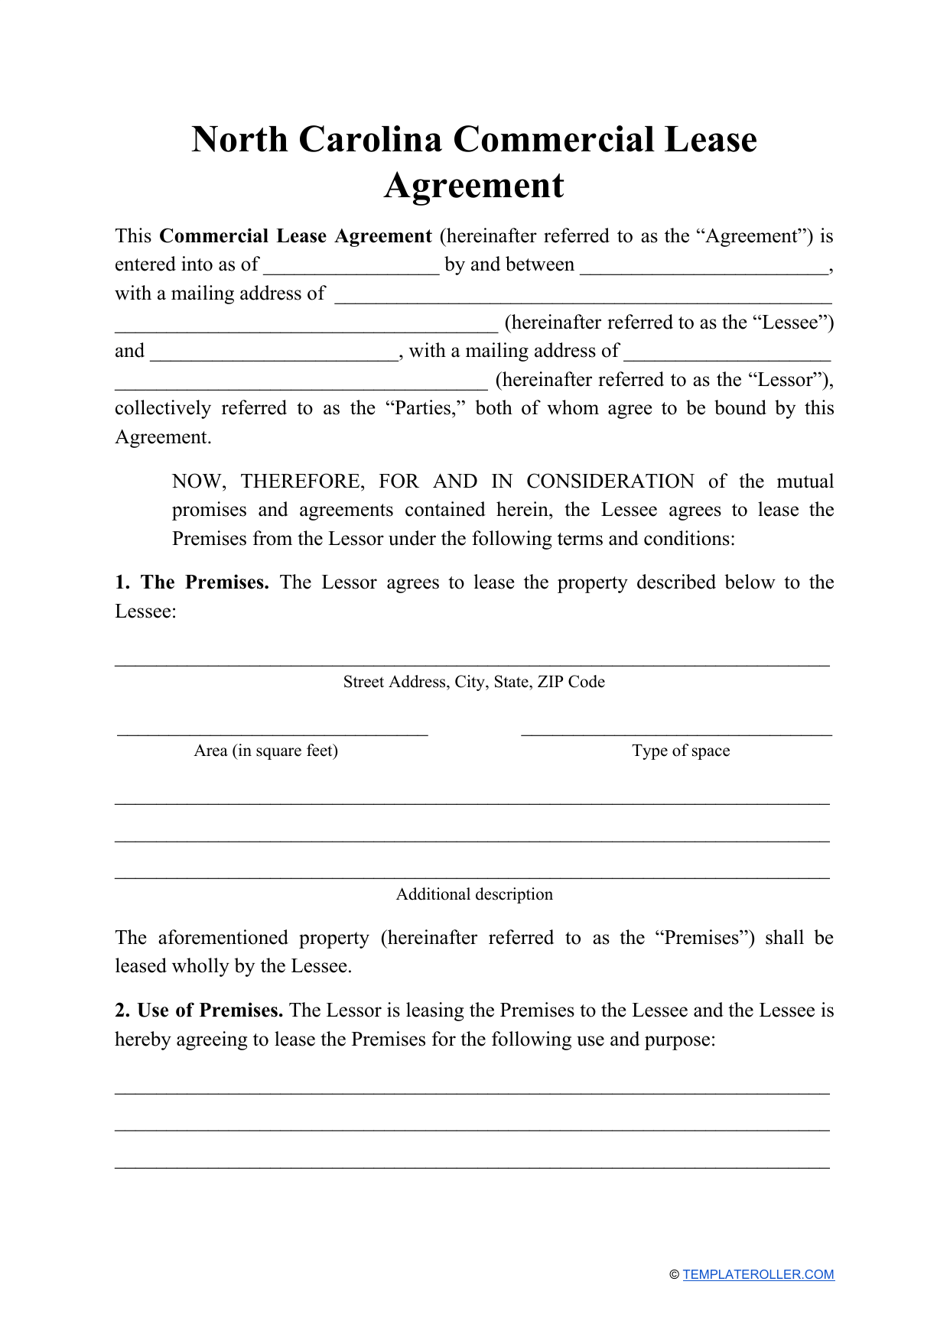 Commercial Lease Agreement Template - North Carolina, Page 1